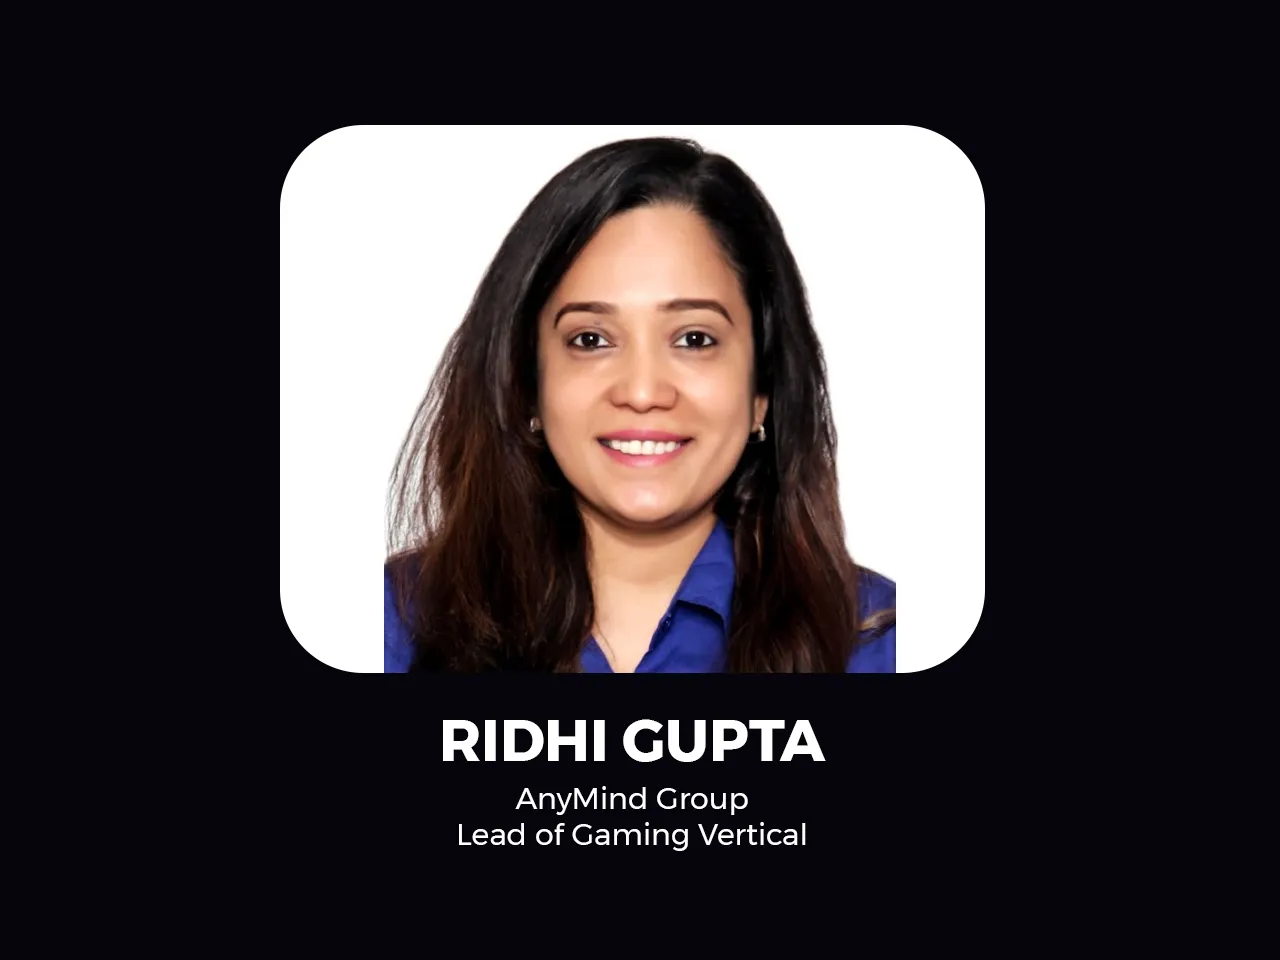 AnyMind Group appoints Riddhi Gupta to lead its gaming vertical